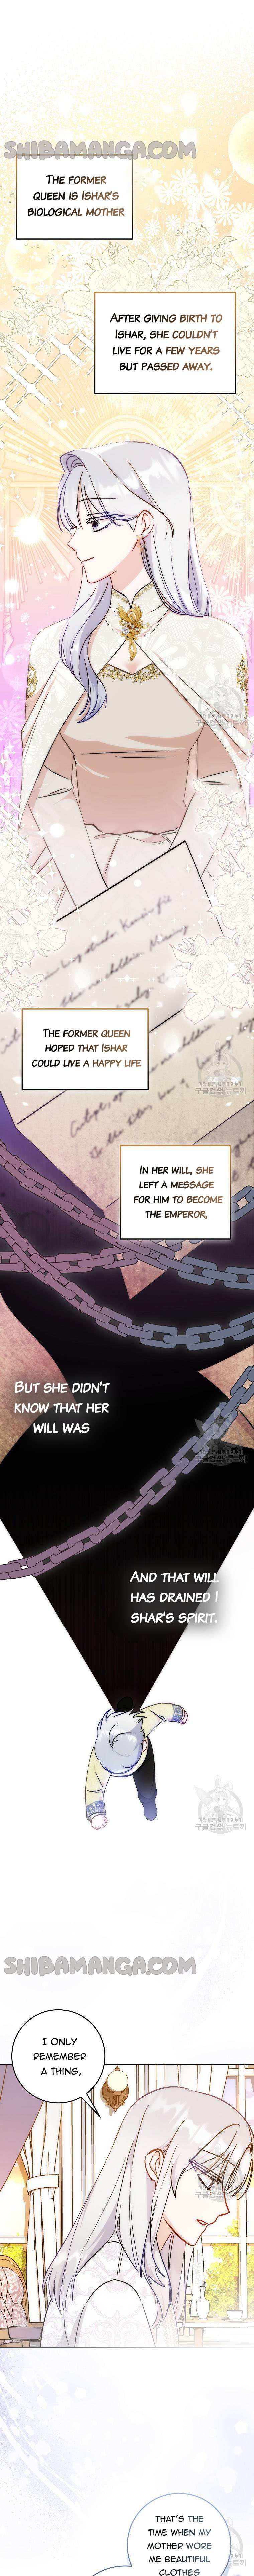 I Became The Sister Of The Time-Limited Heroine - Page 2